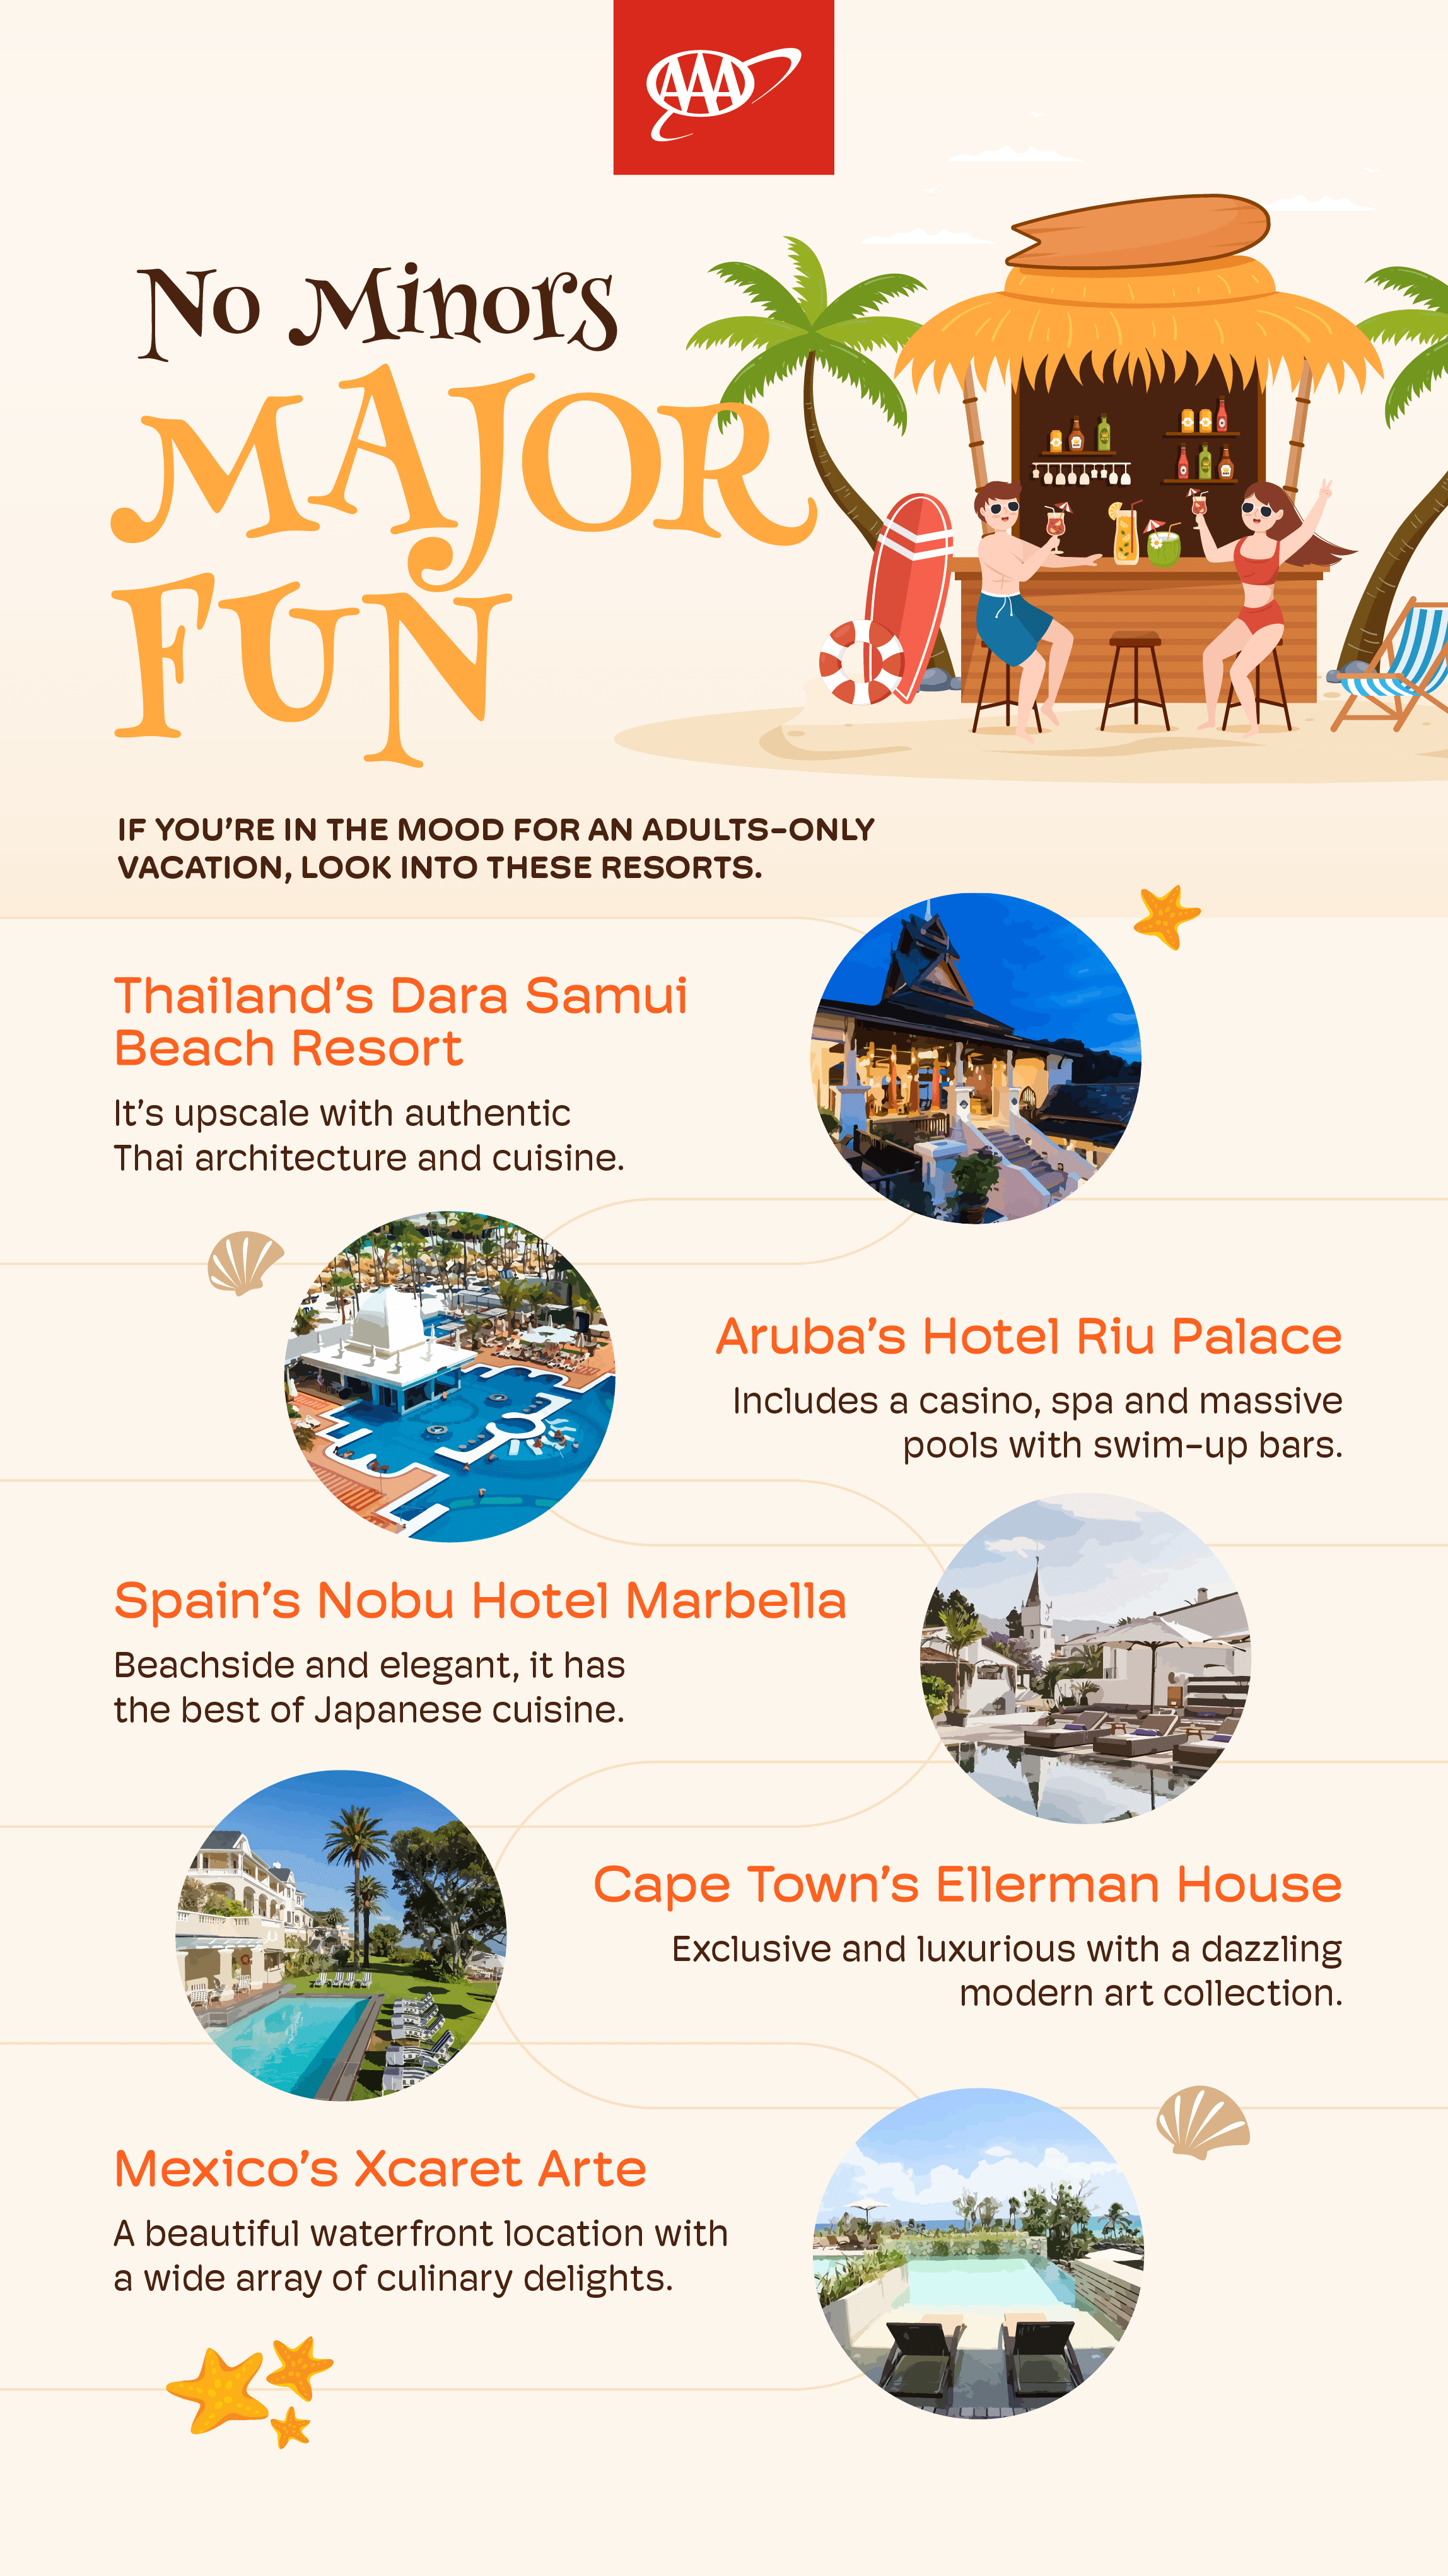 AAA infographic on all inclusive adult only resorts